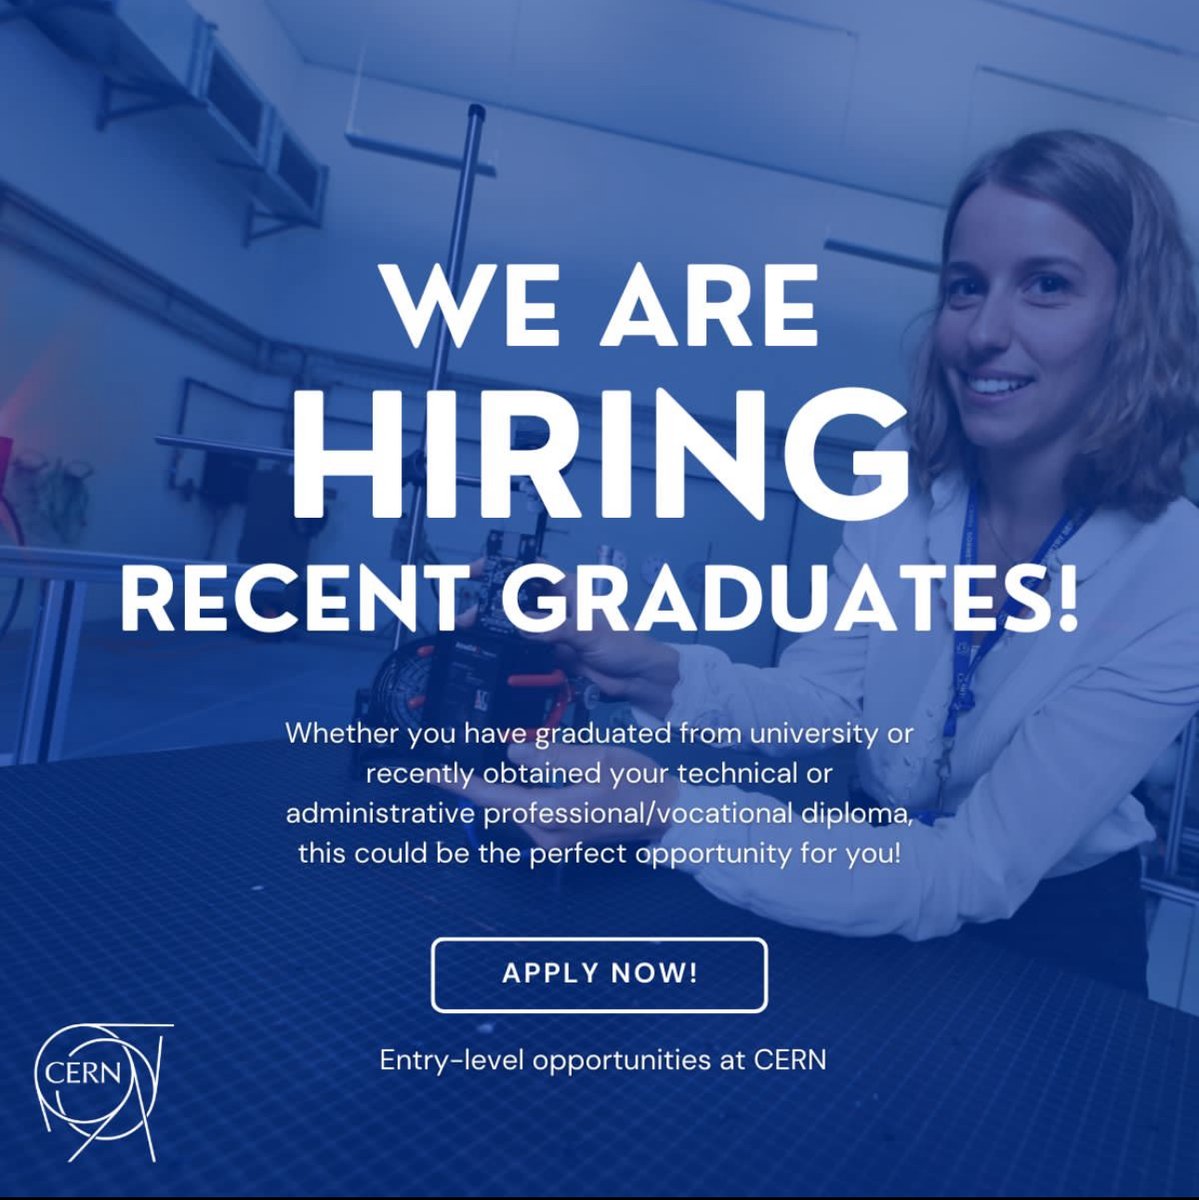 🌍 CERN’s Early Career Professionals applications are now open!

Learn more: shorturl.at/gxyVY

Deadline: 19.01.2024

#CERN #scienceeducation #techcareer #stem #CareerOpportunity #TakePart #opportunity #hiring #jobs #Geneva #recentgraduates #earlycareers